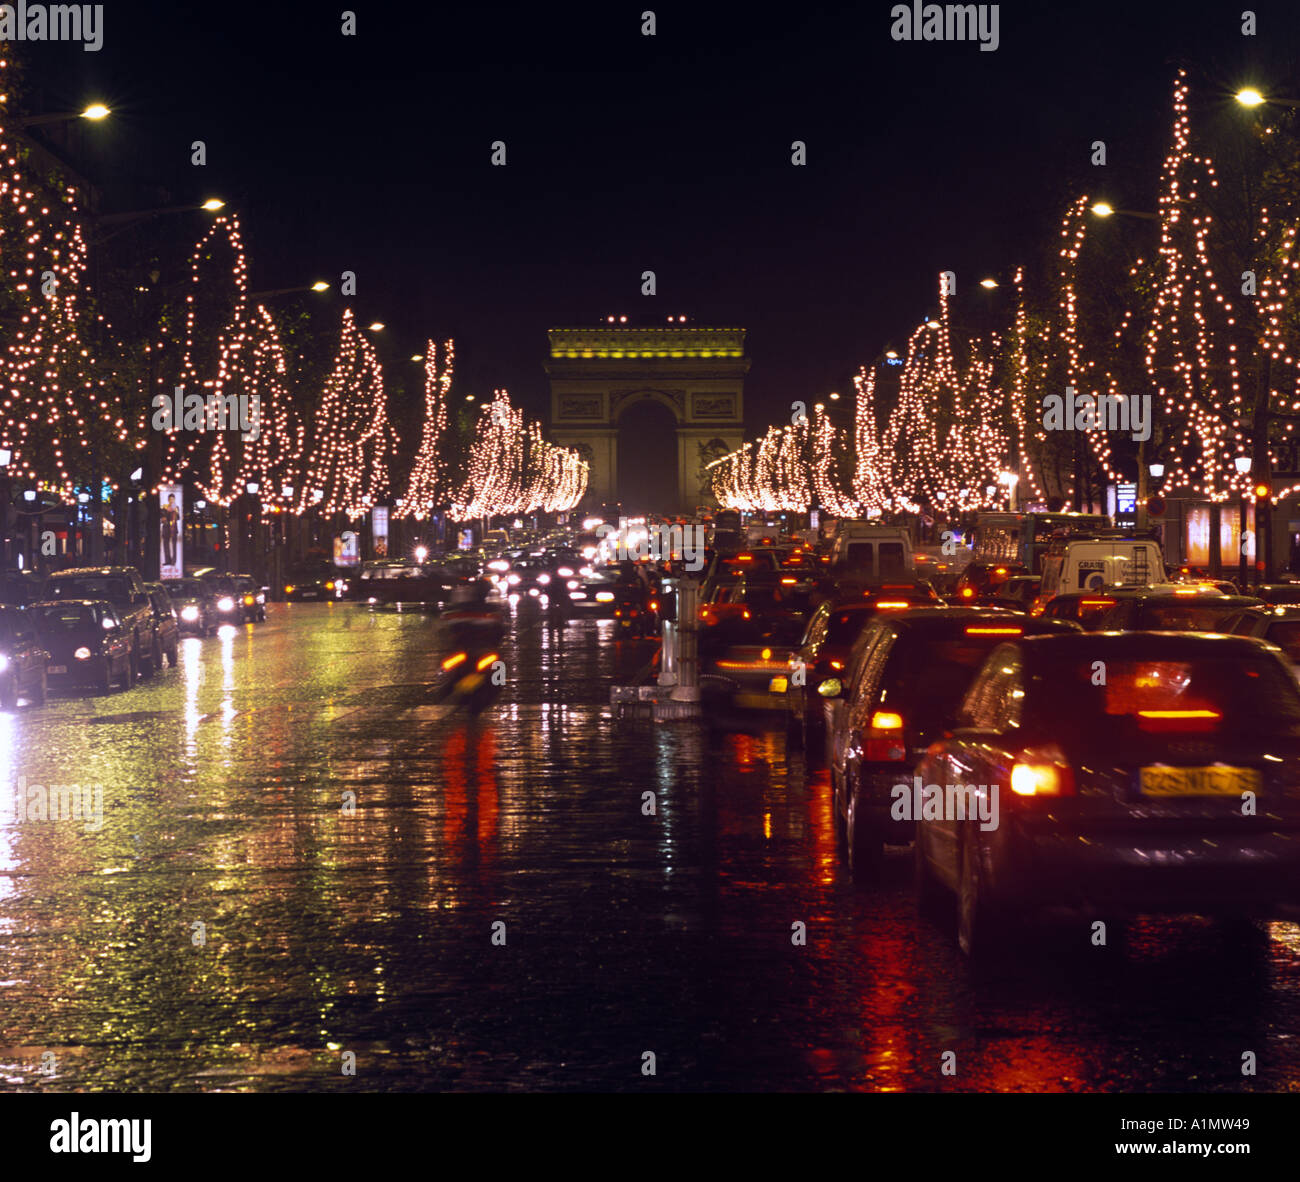 A night view of the Champs Elysées in Paris France Stock Photo